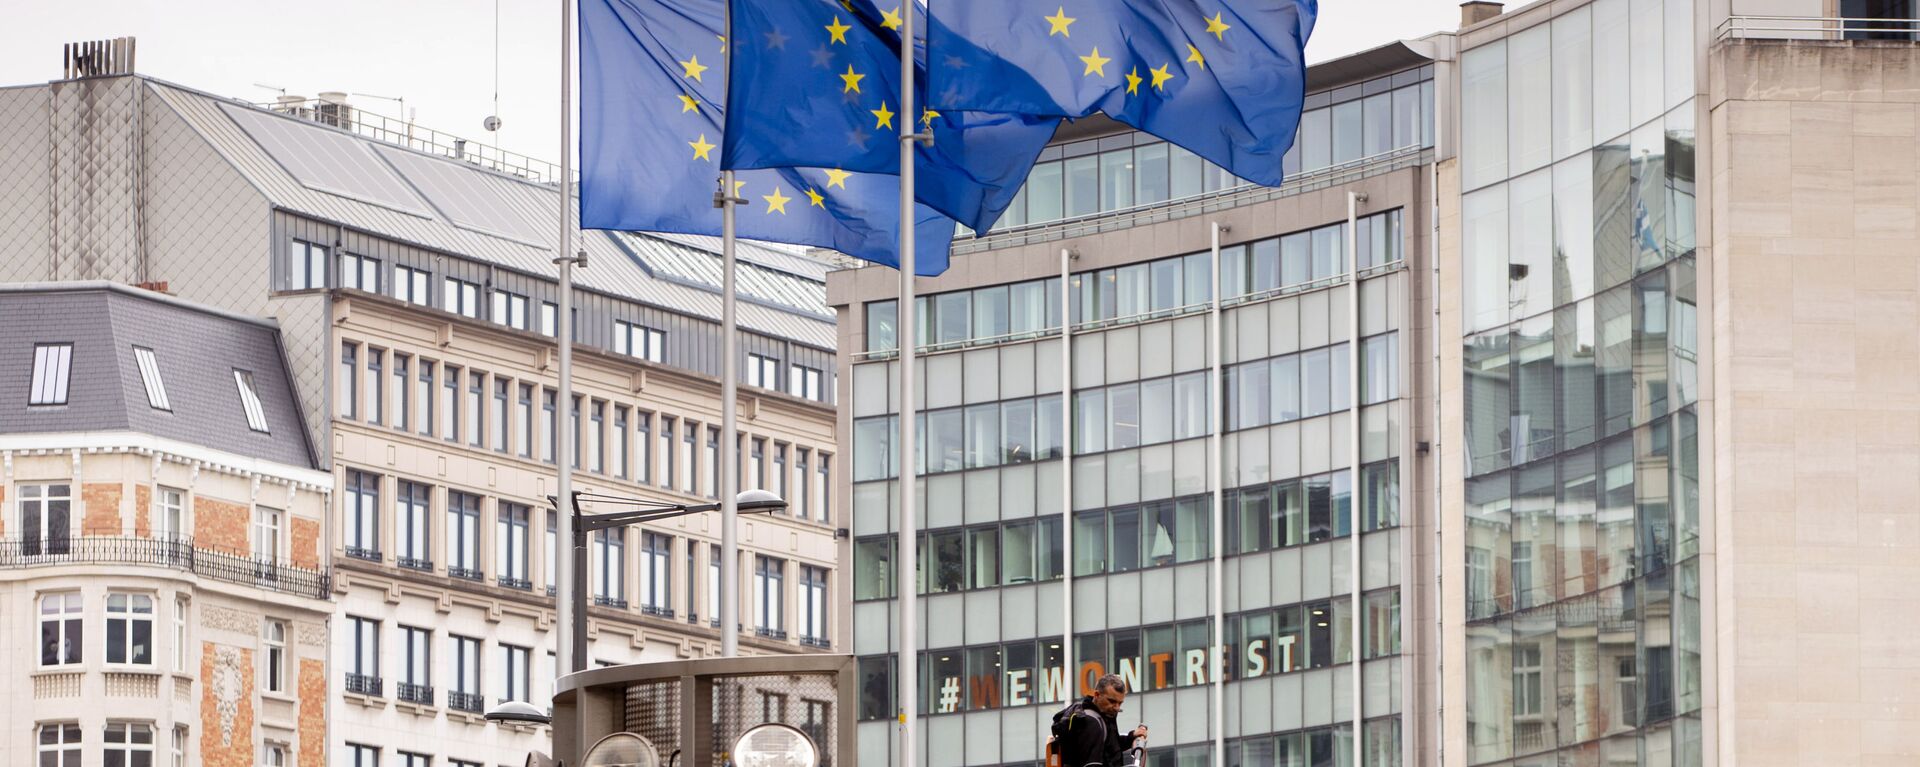 European Union flags flap in the wind as two gardeners work on the outside of EU headquarters in Brussels, Wednesday, Sept. 11, 2019.  - Sputnik International, 1920, 06.09.2022